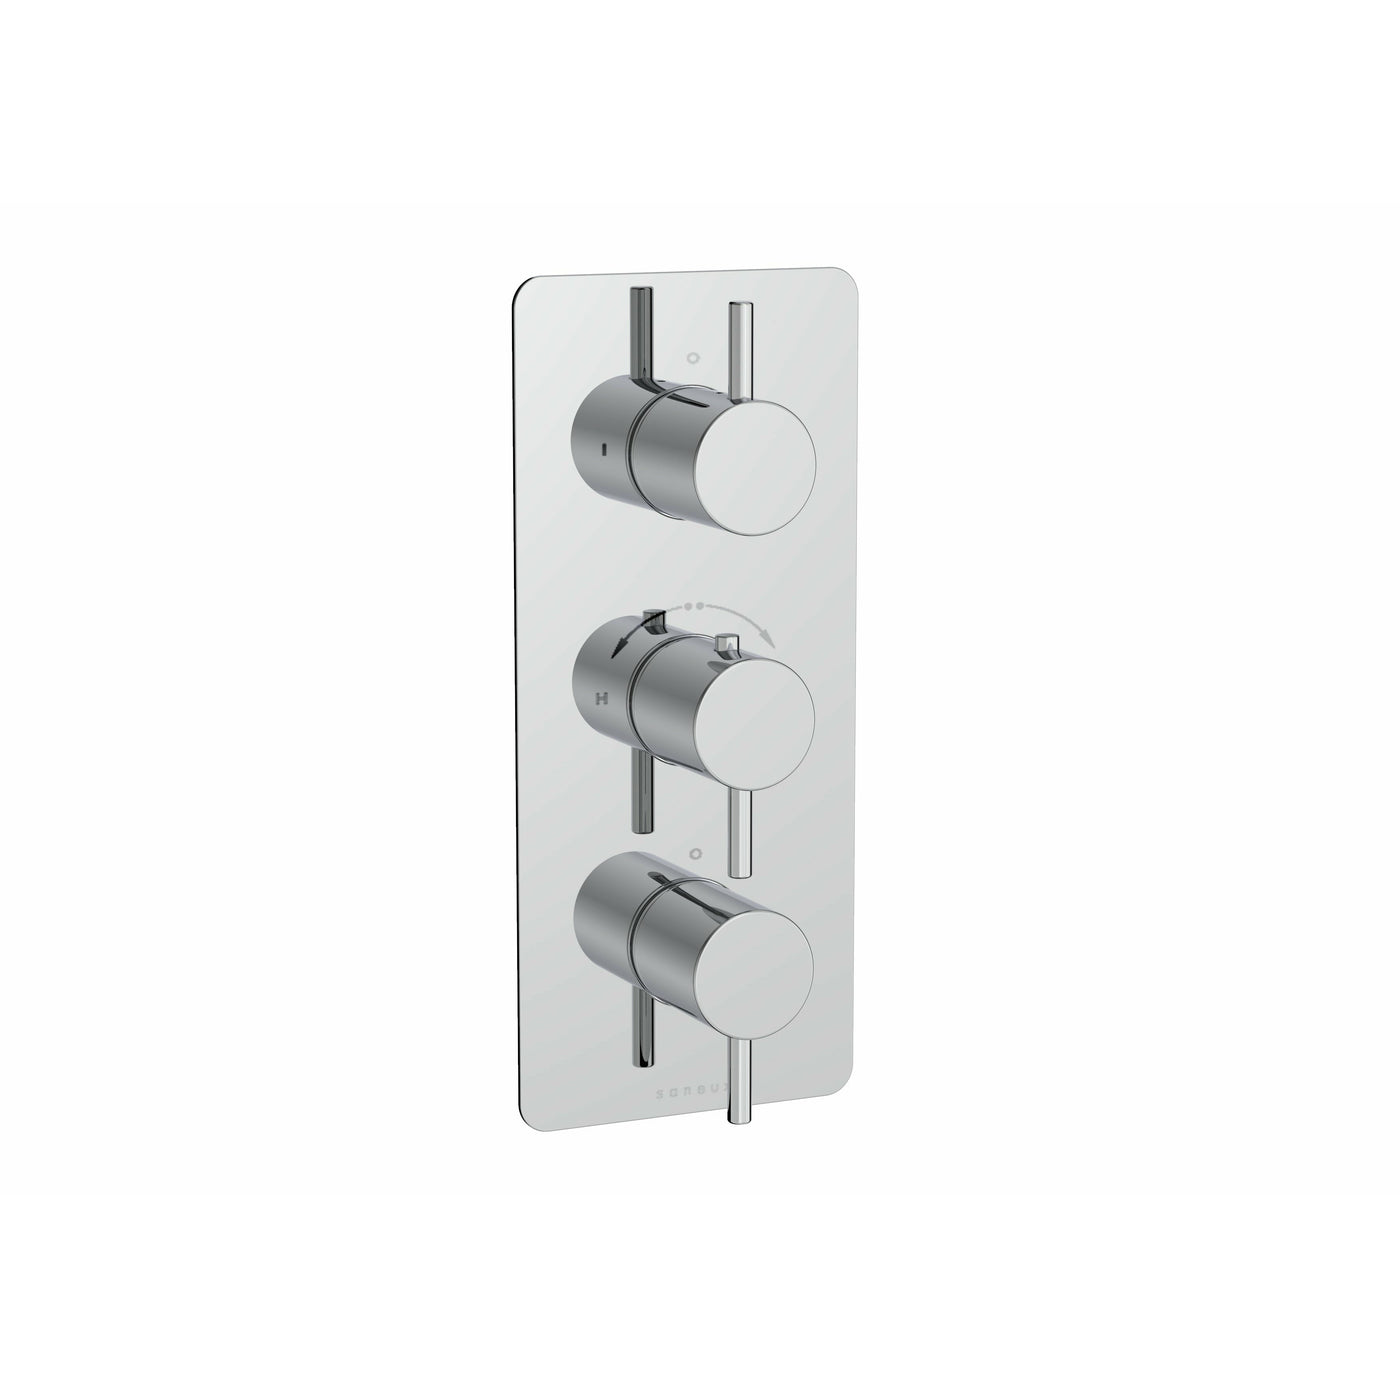 Saneux Chrome 3-way thermostatic valve - CO221 - Letta London - Thermostatic Showers